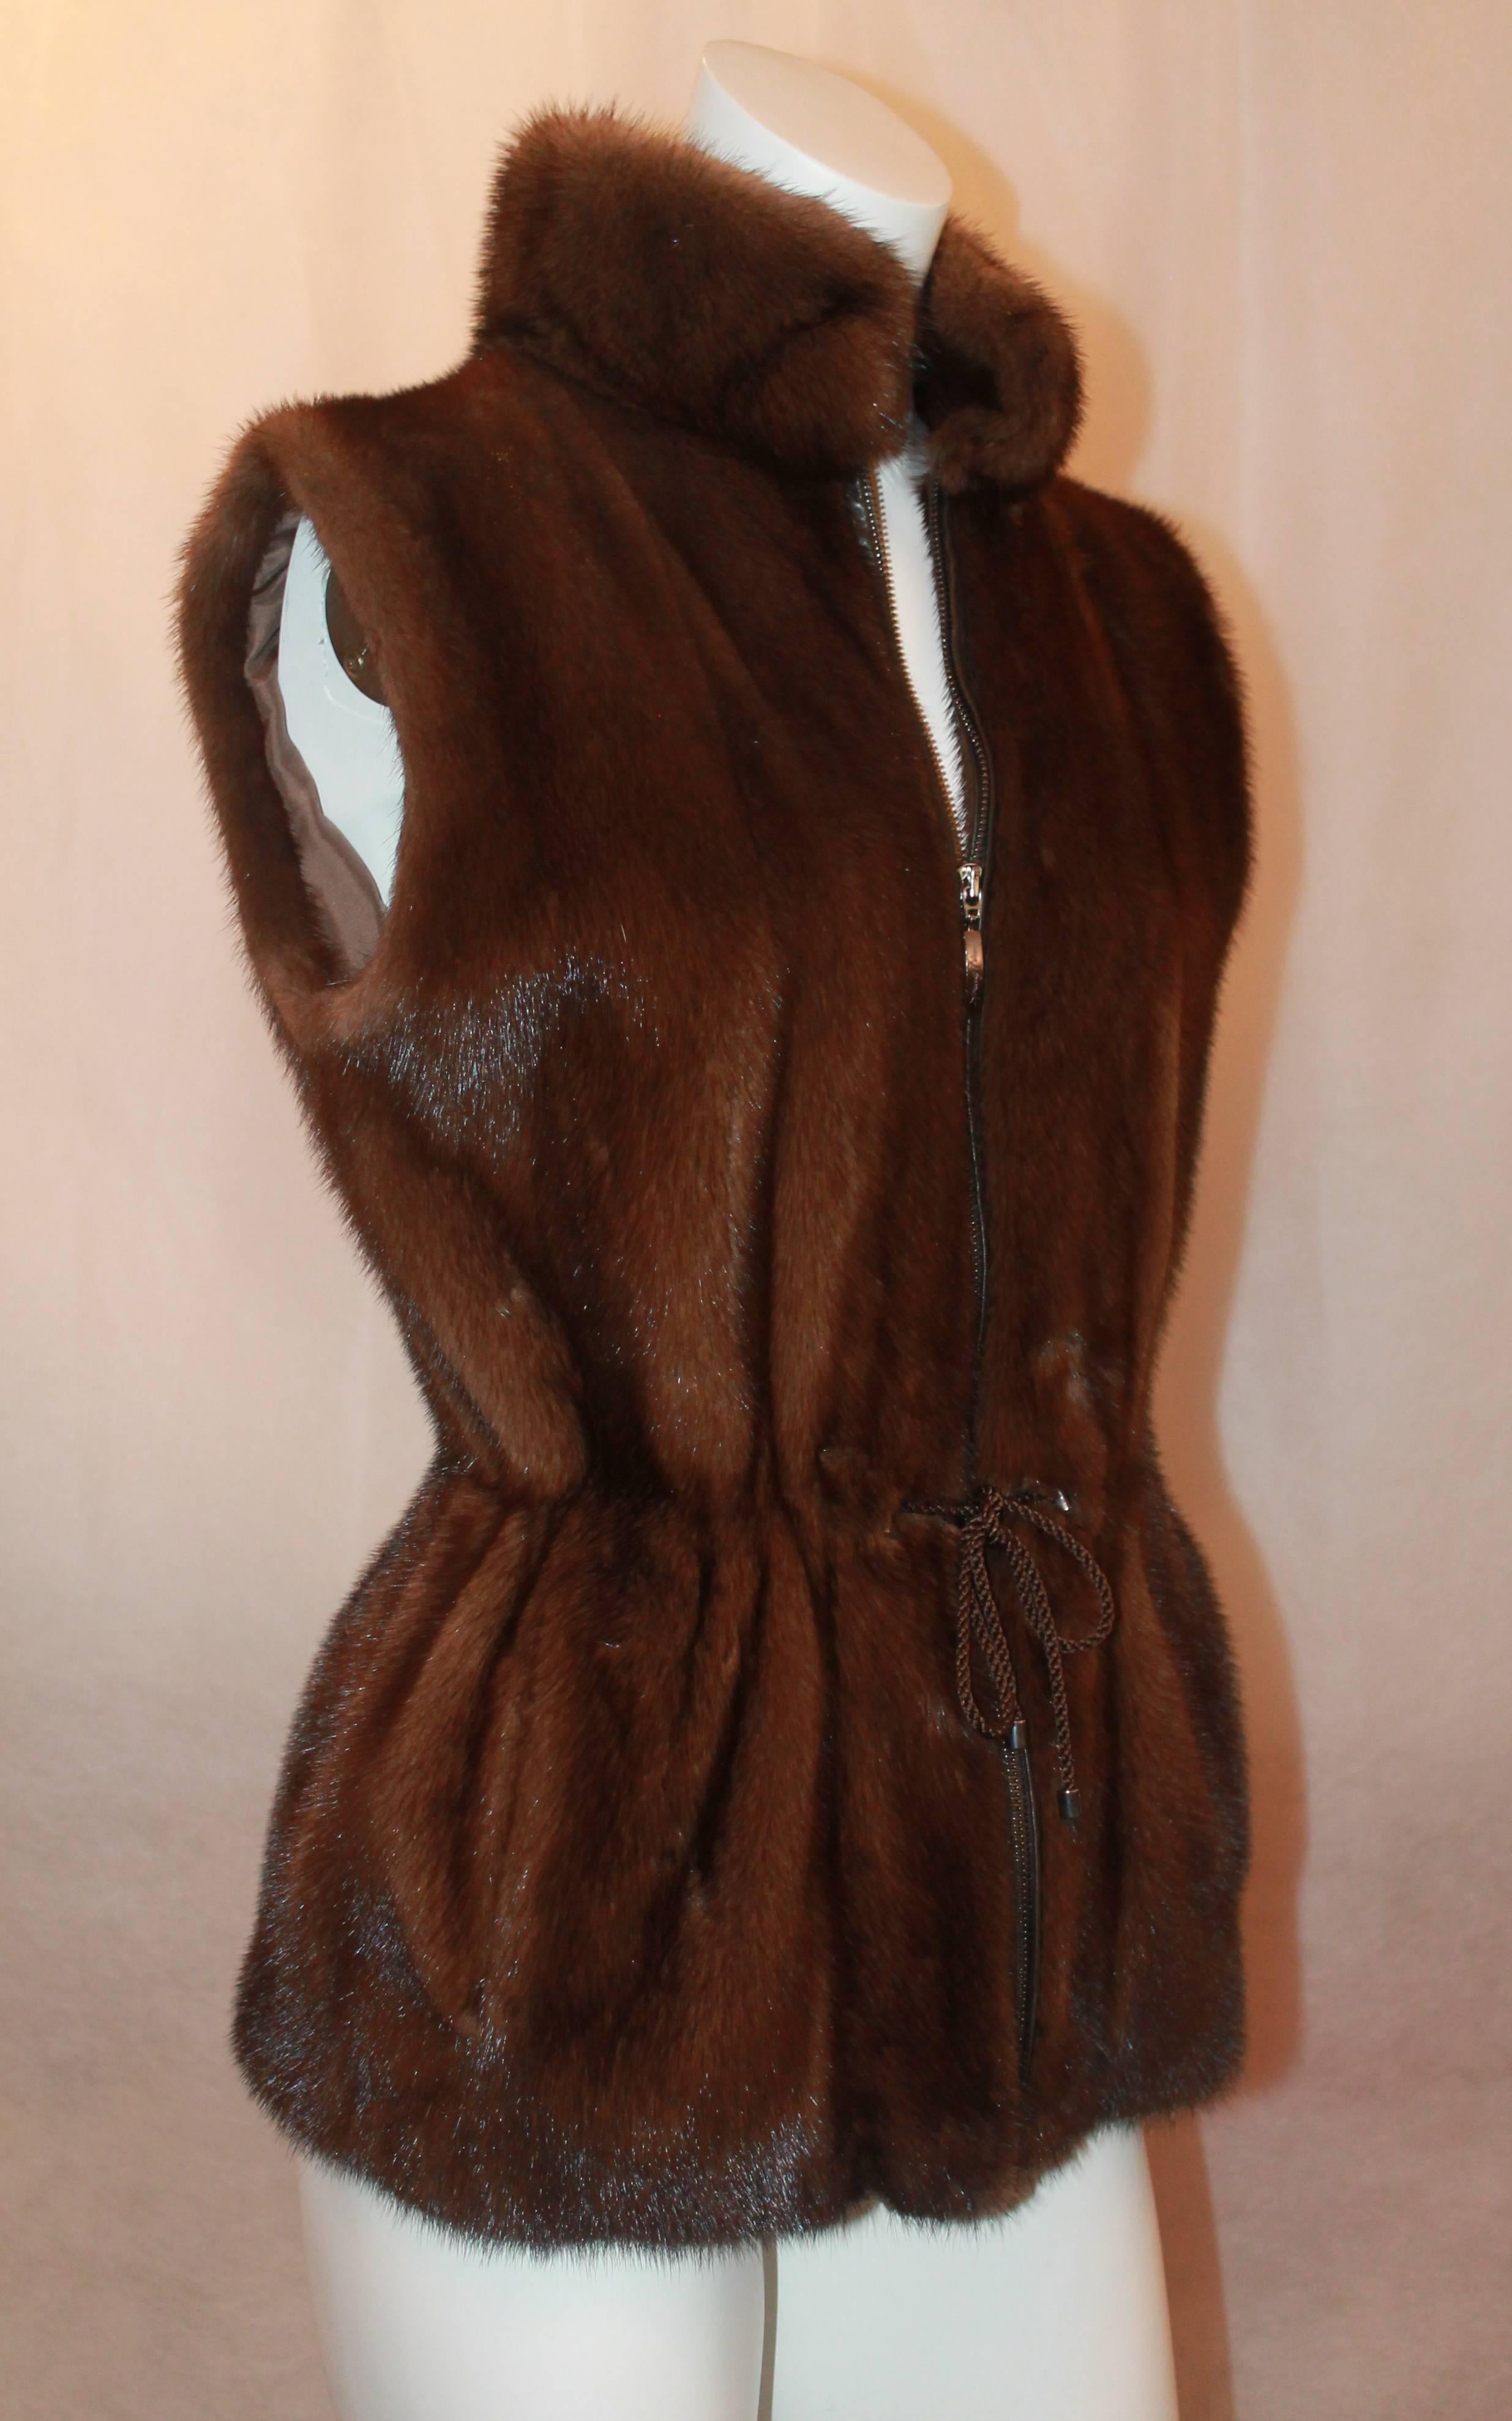 Sprung Freres Brown Mink Vest w/ Collar & Waist w/ Cinching Tie - 36.  This beautiful vest is in excellent condition.  It features gorgeous brown mink fur, a cinched waist with a ties, a full front zipper, and two front pockets.  This is a very